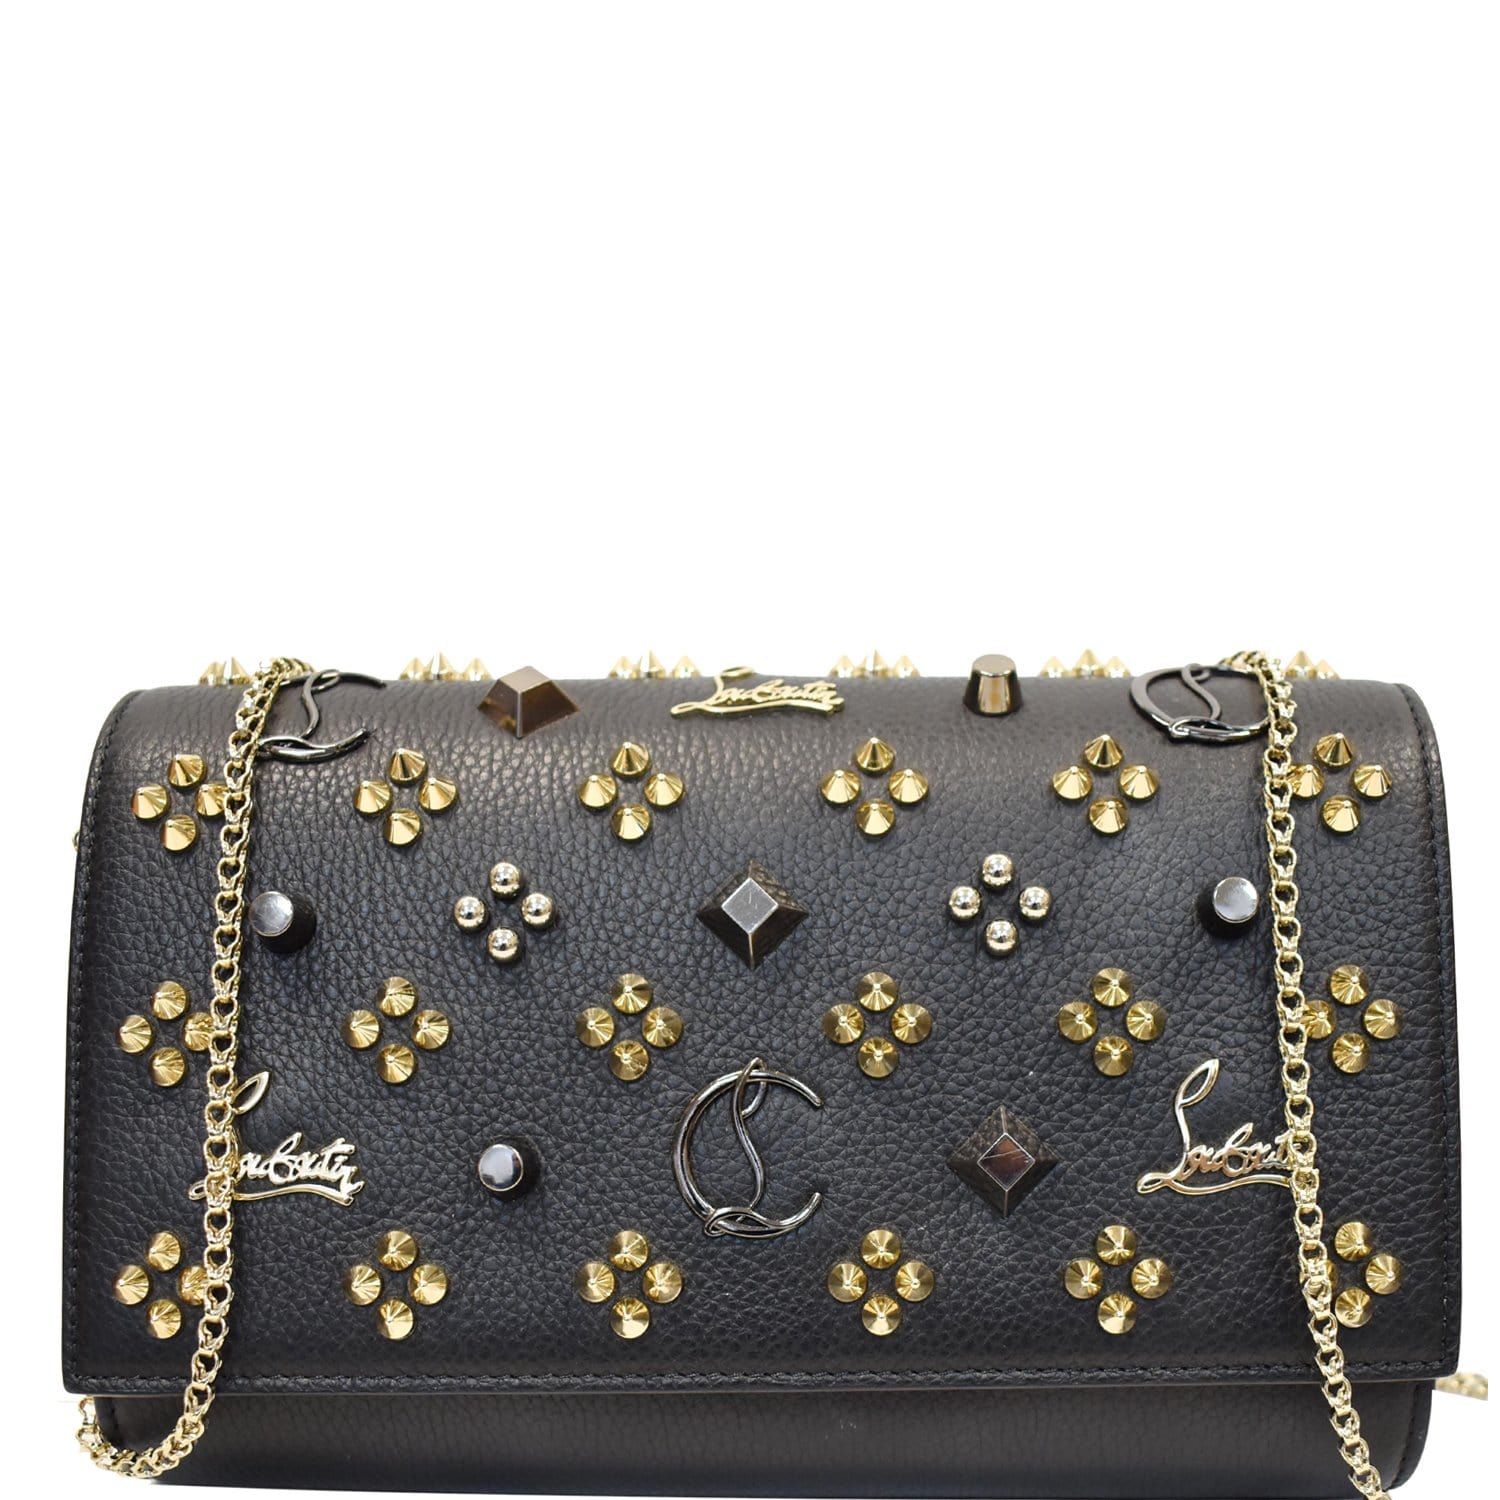 Louis Vuitton Unveils Monogram Collaboration Pieces from Karl Lagerfeld  Christian Louboutin and More  PurseBlog